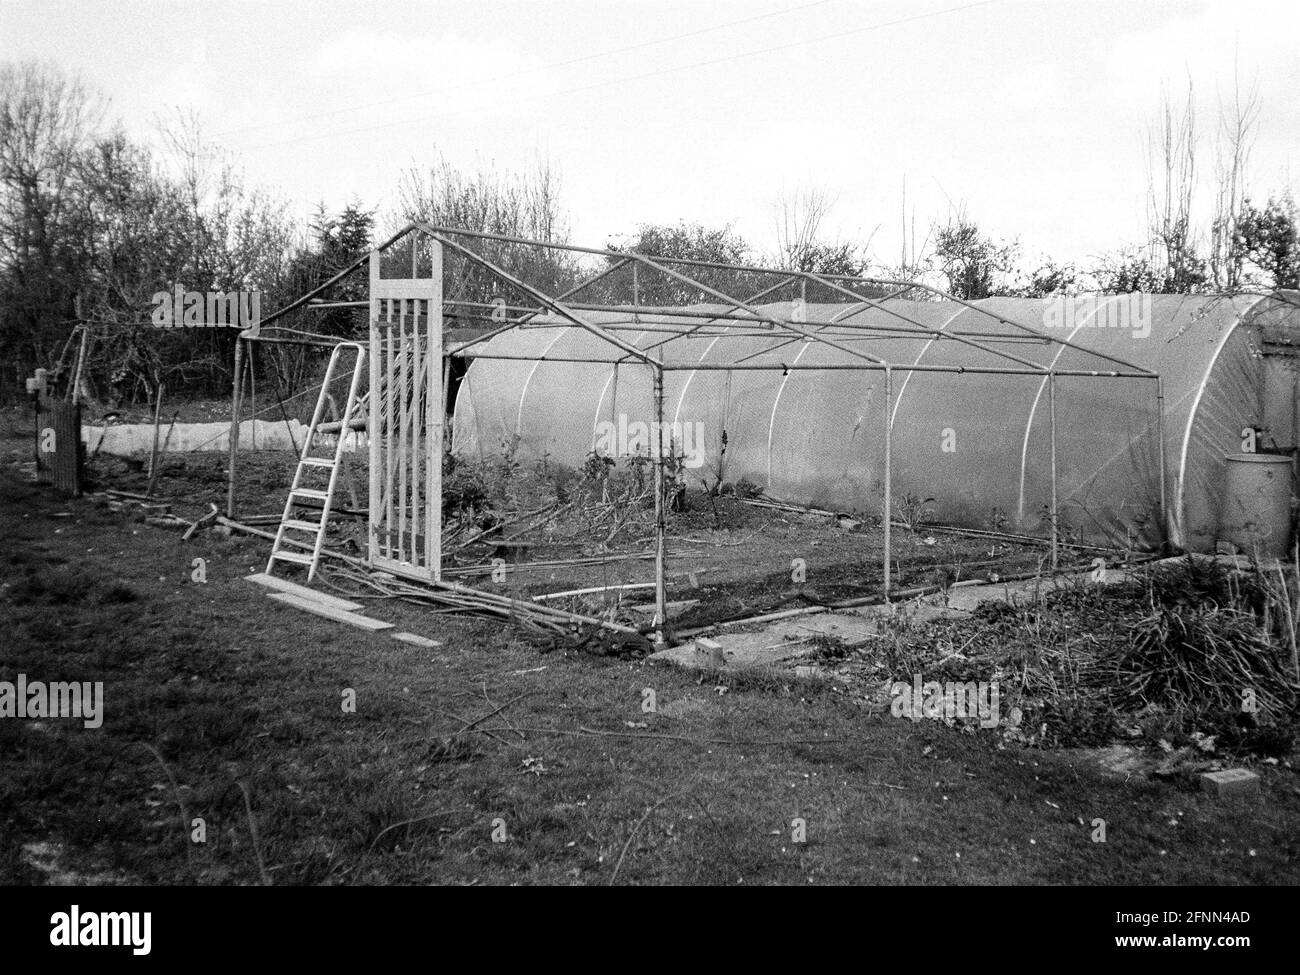 Fruit cage et poly tunnel, Hattingley, Hampshire, Angleterre, Royaume-Uni. Banque D'Images